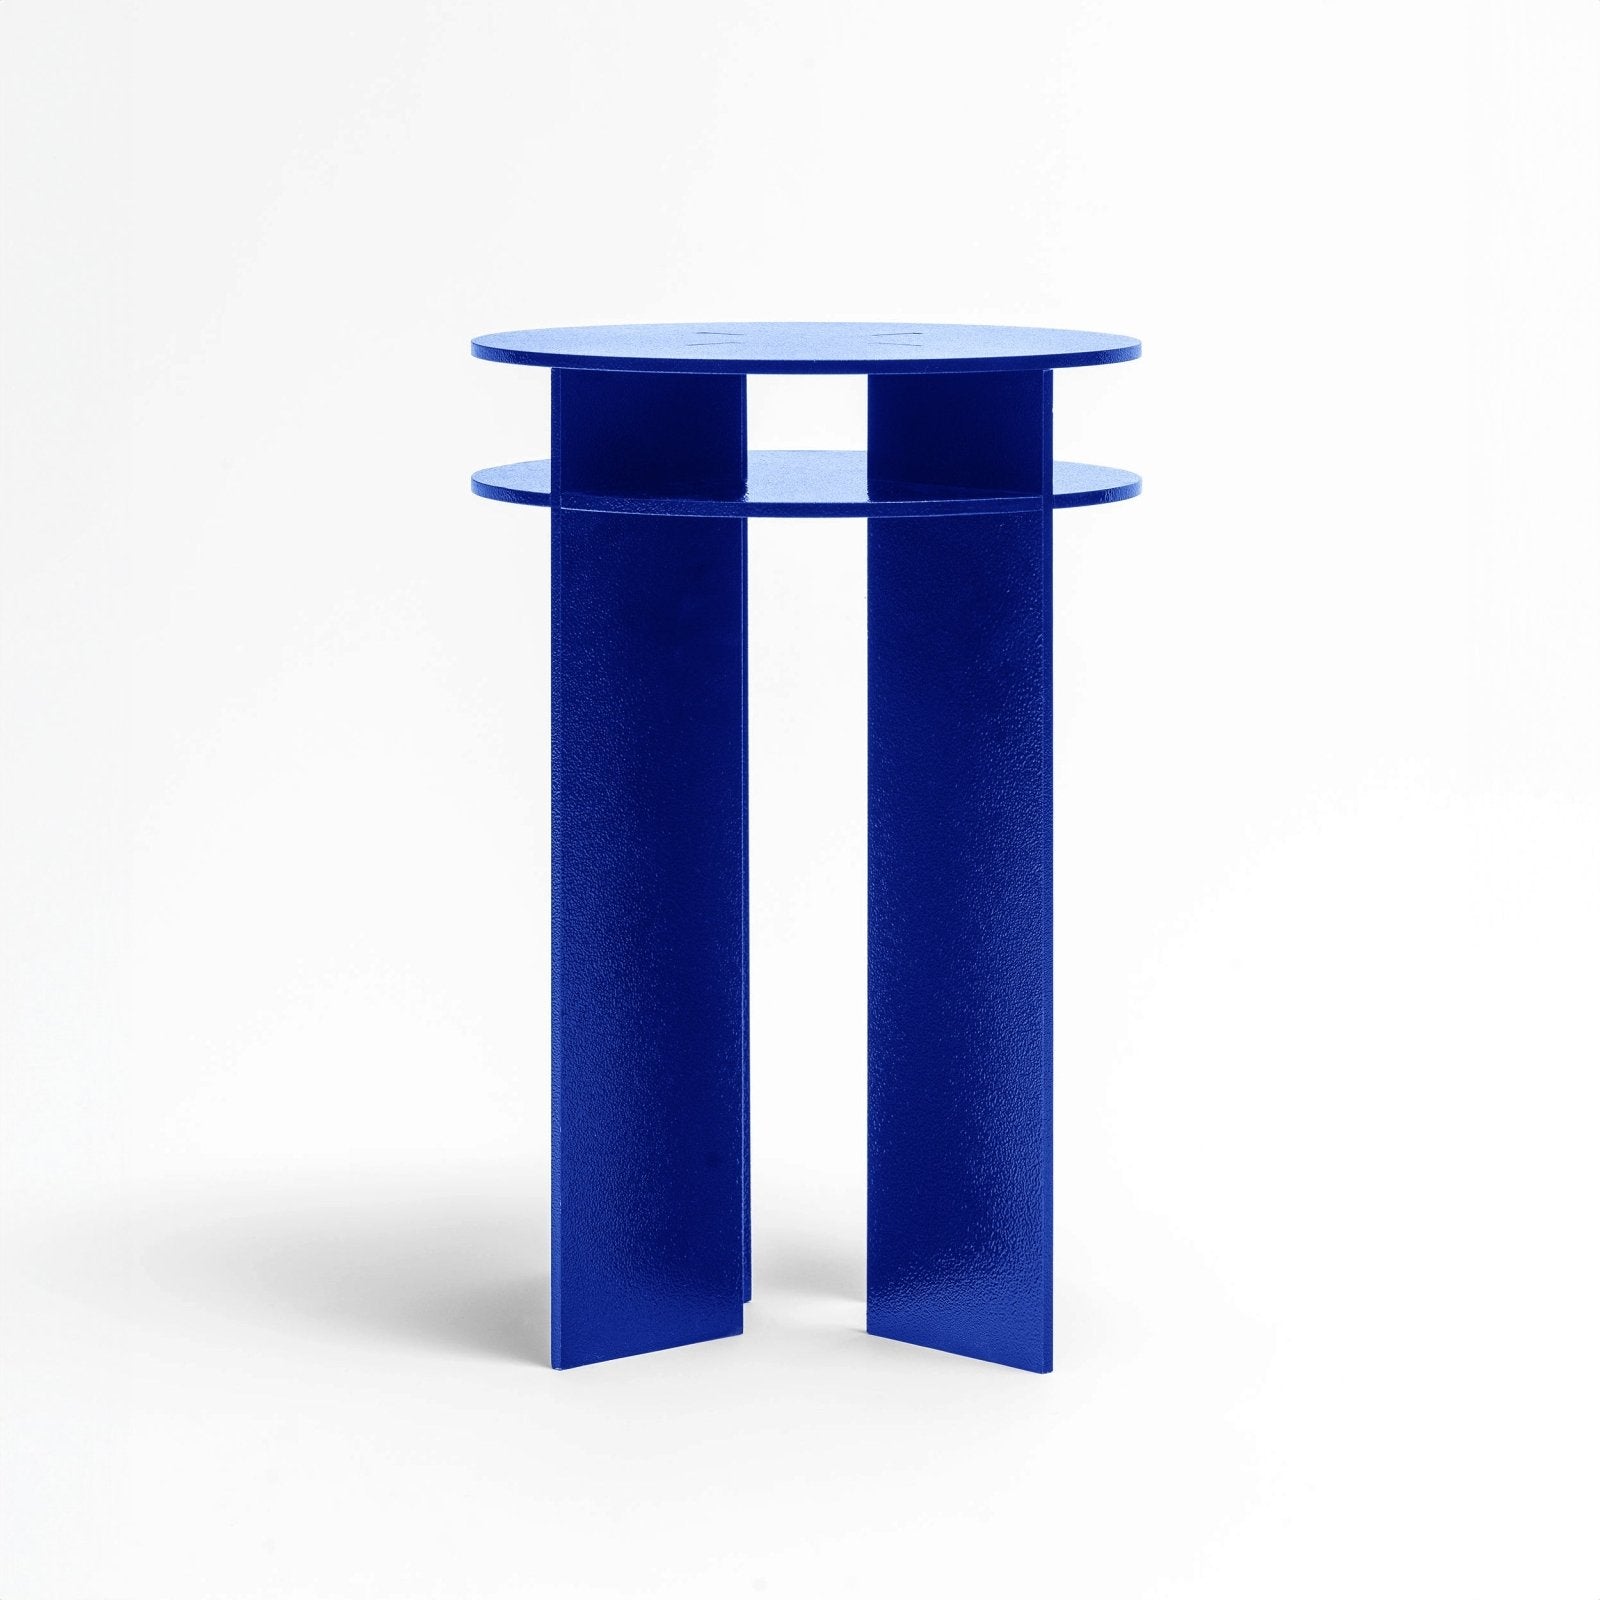 INDUSTRIAL x NM13 Stool side table by NM3